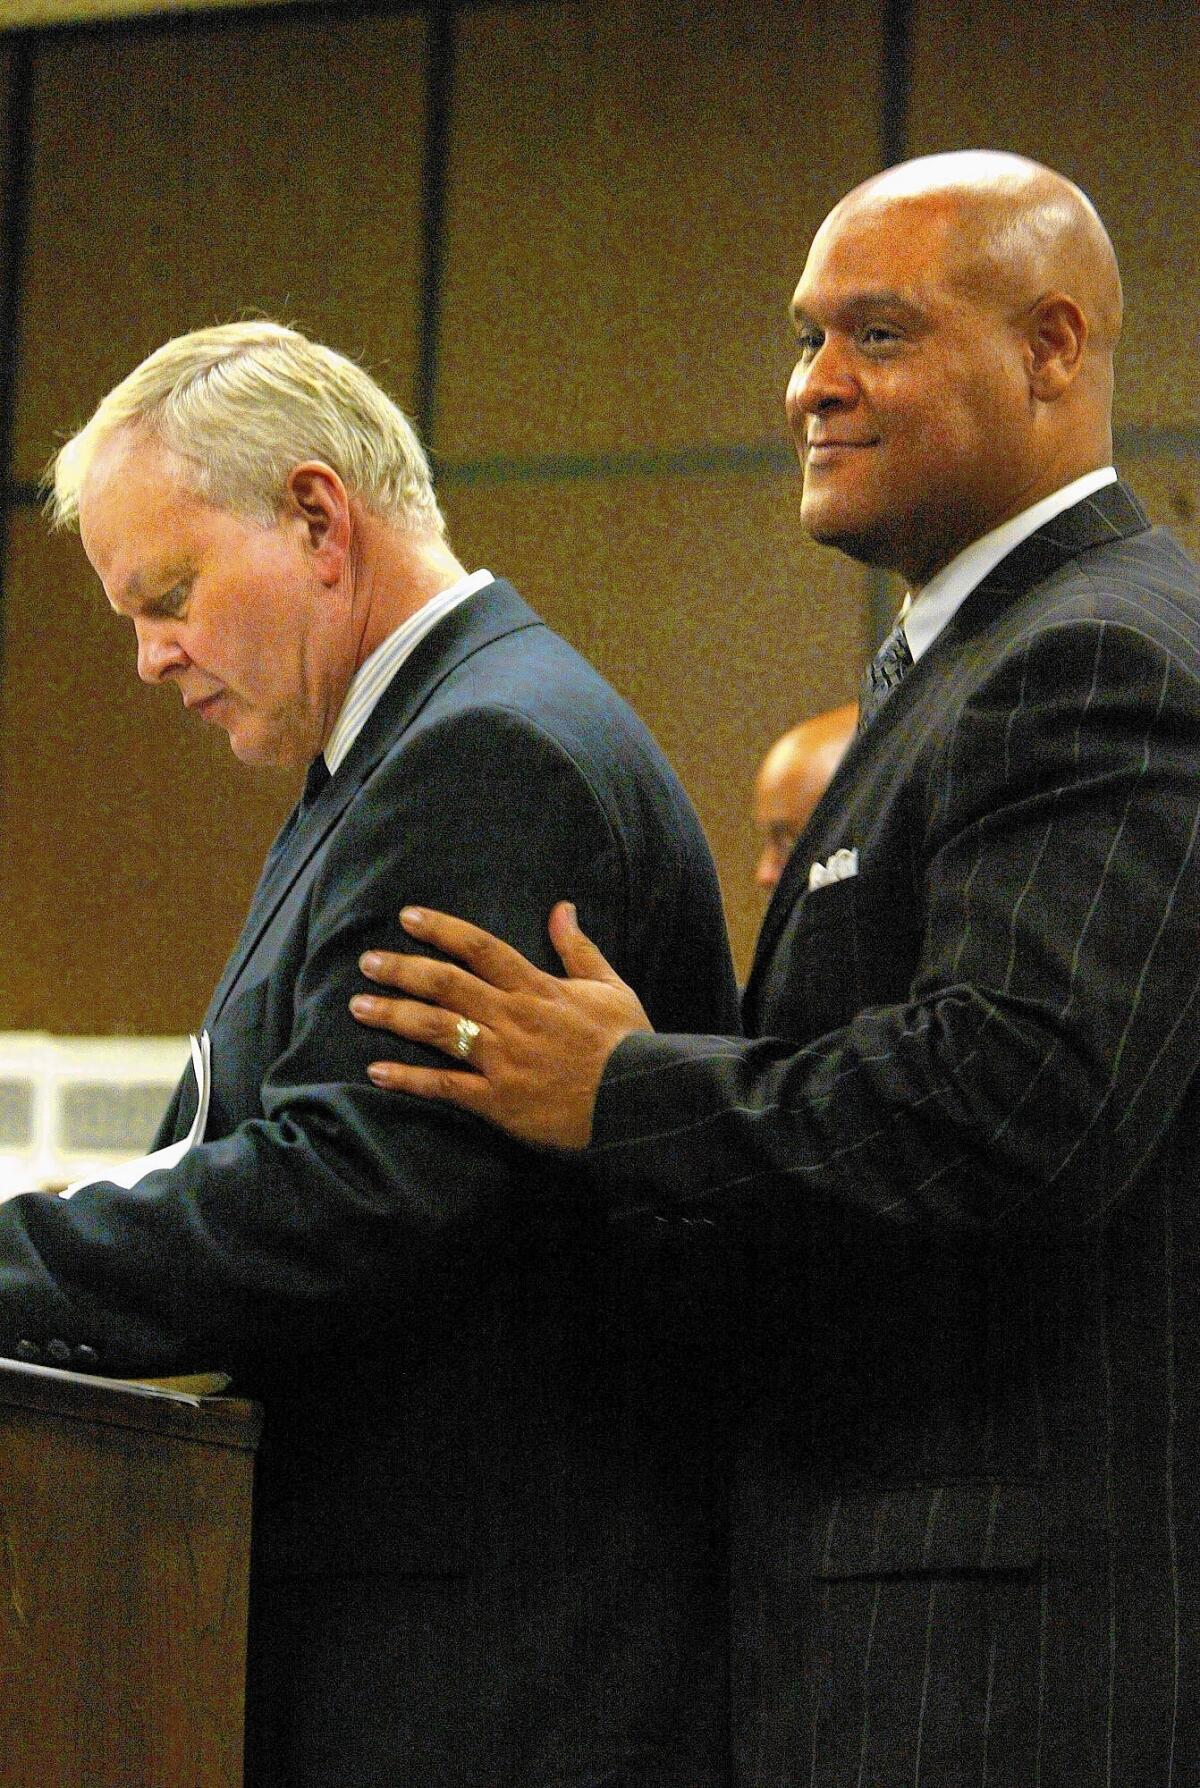 Attorney Ben Pesta, left, appears in court in 2004 with former Compton Mayor Omar Bradley, who was accused of misappropriating public funds while mayor.